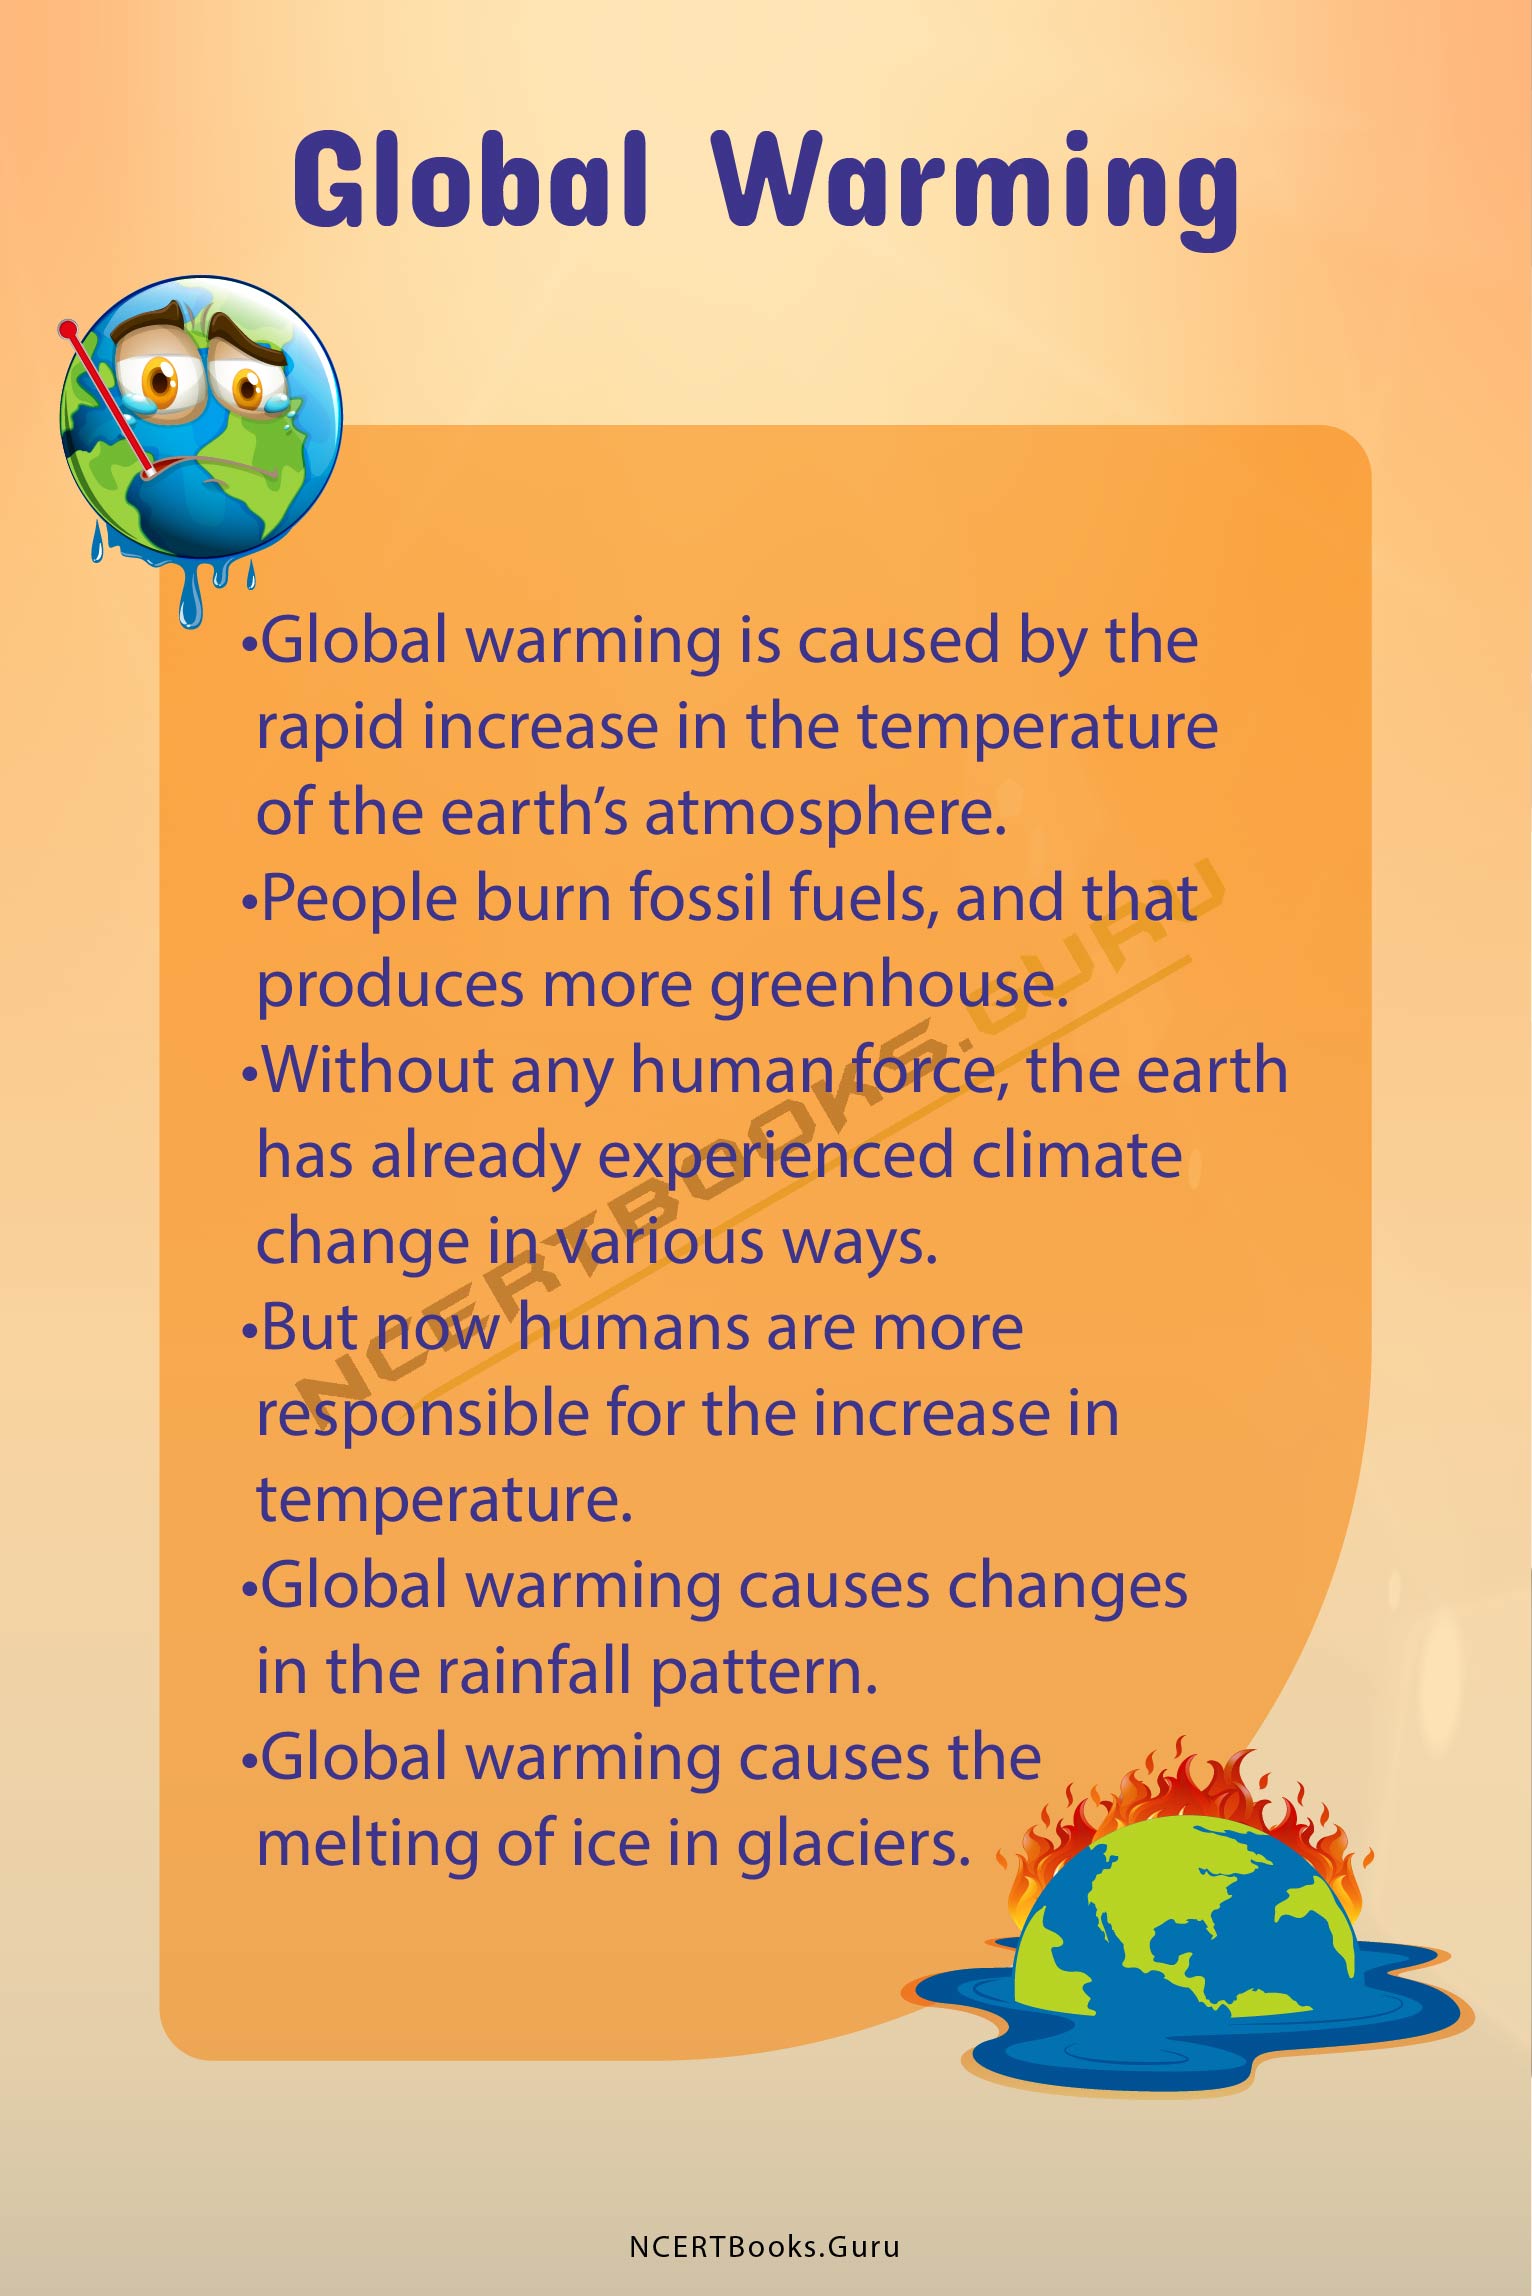 speech on global warming and its effects